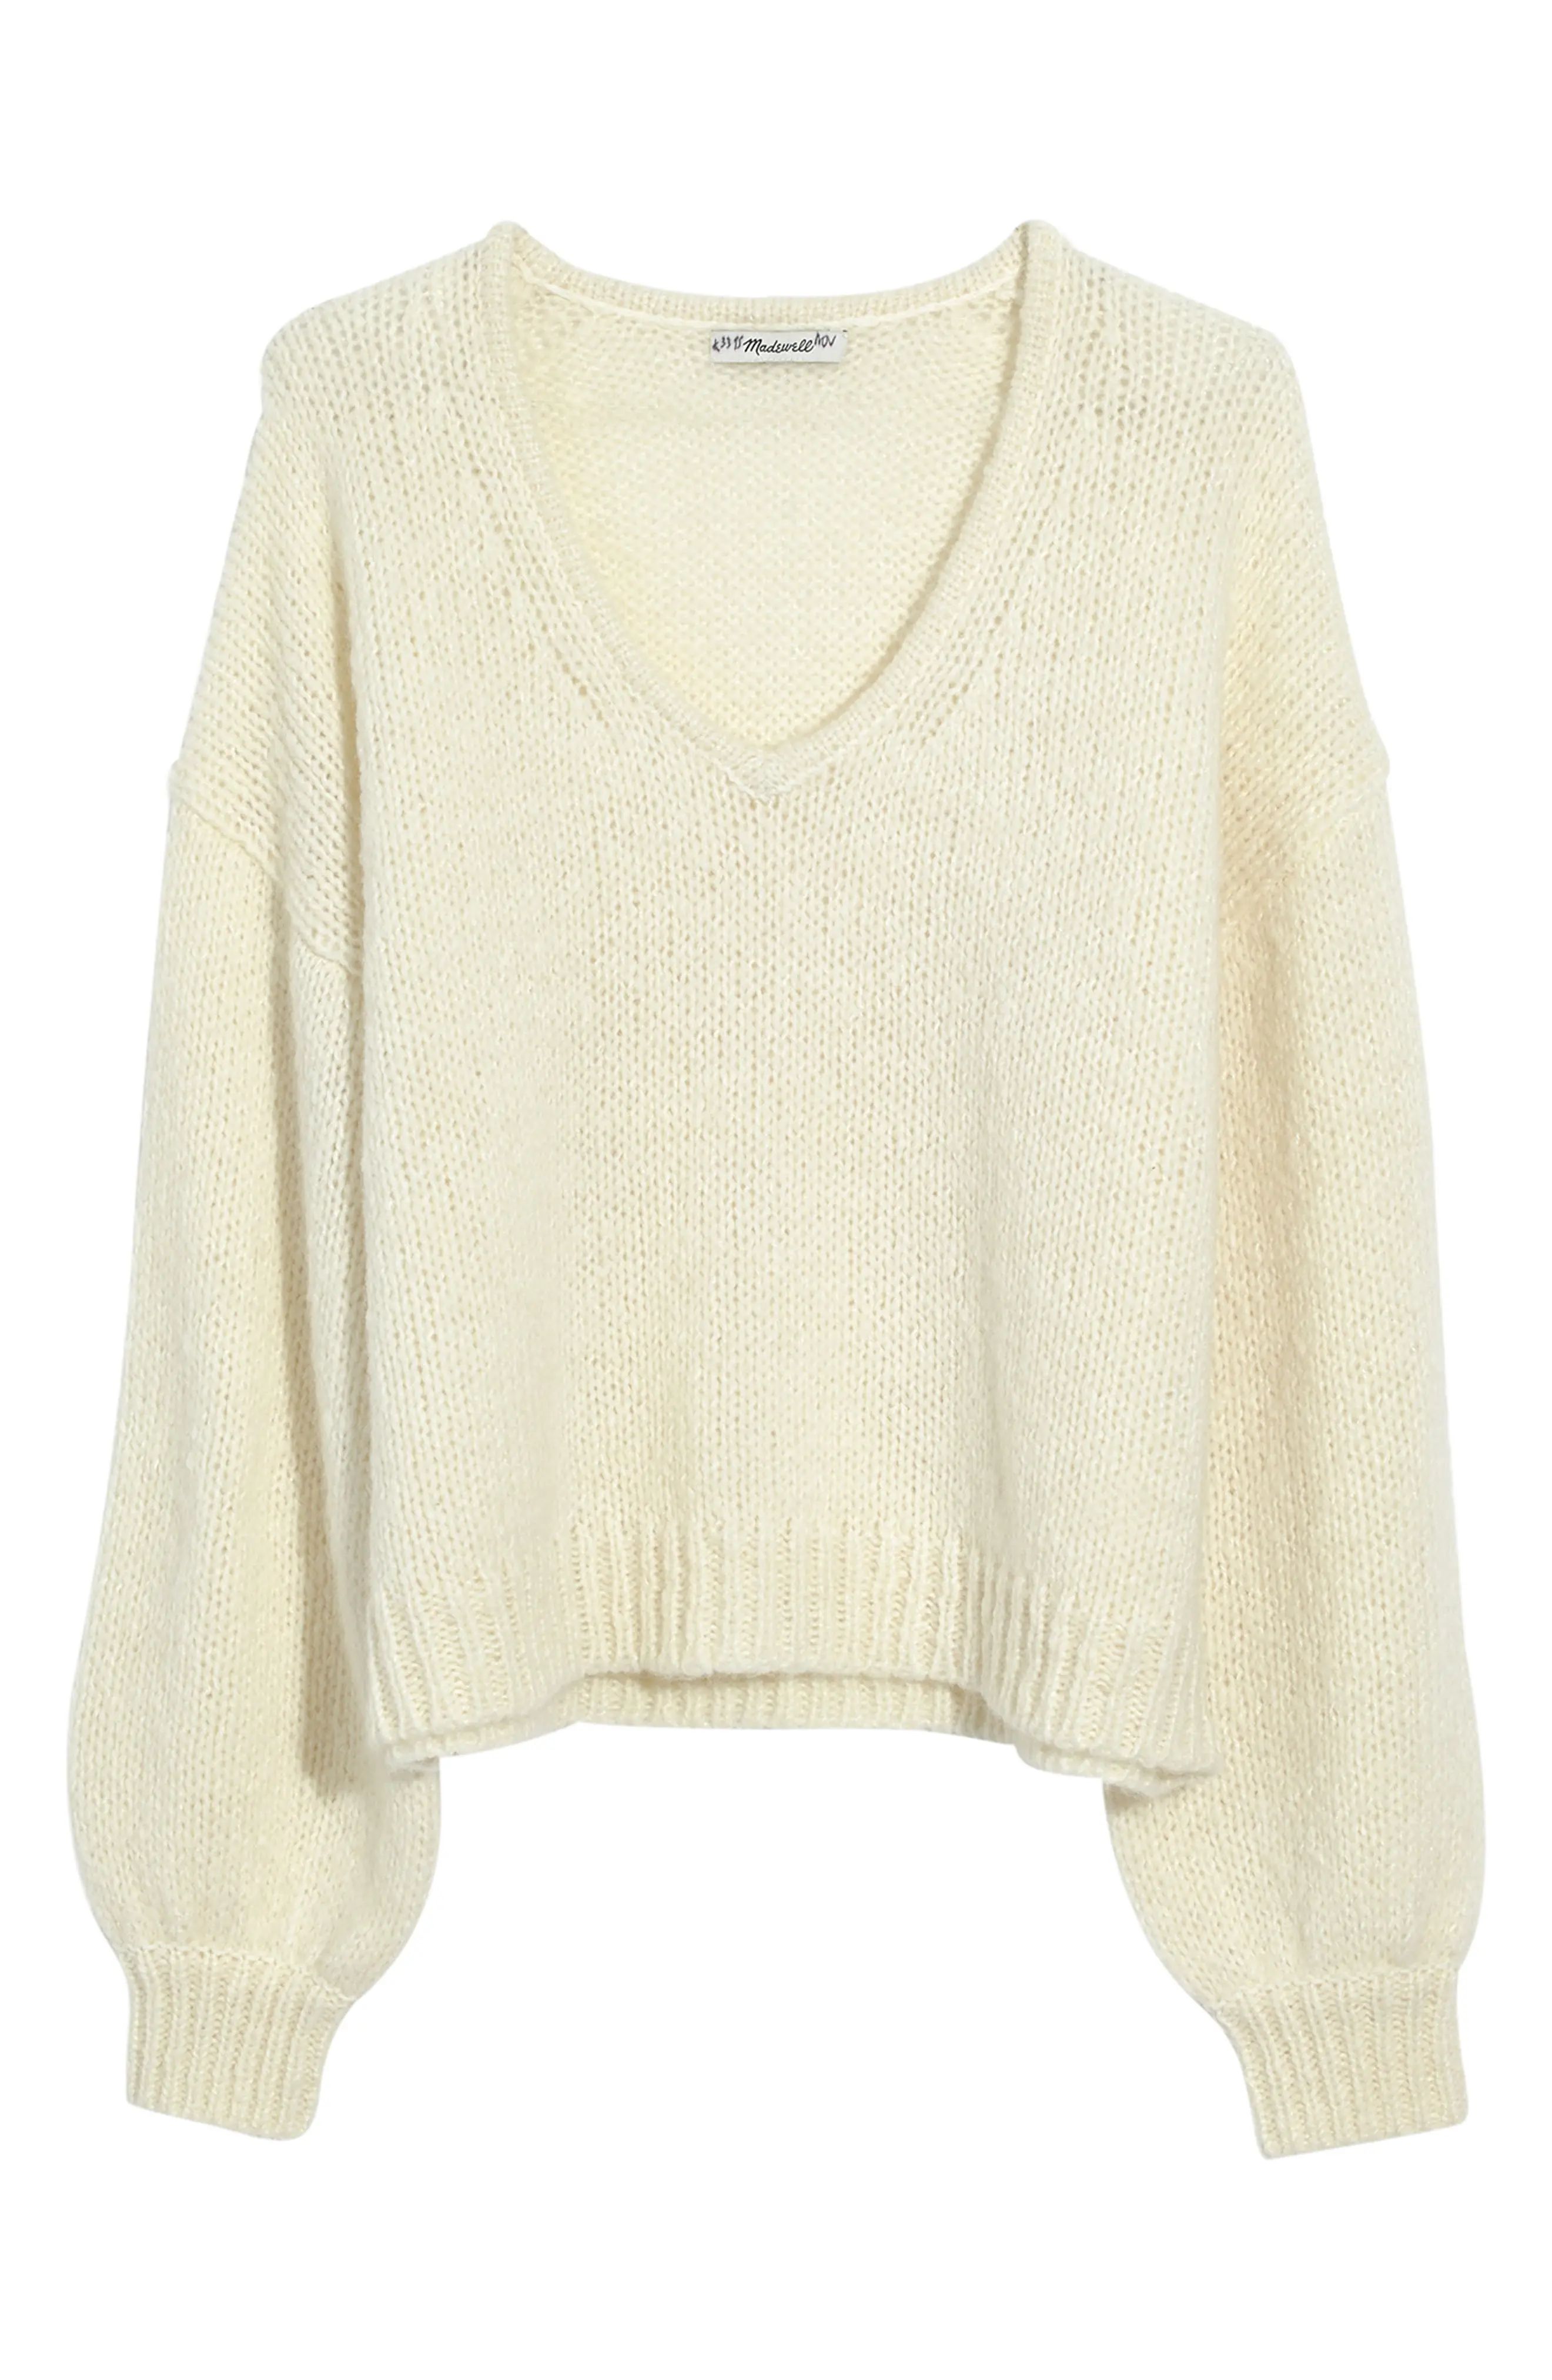 Women's Madewell Balloon Sleeve Pullover Sweater, Size X-Small - White | Nordstrom